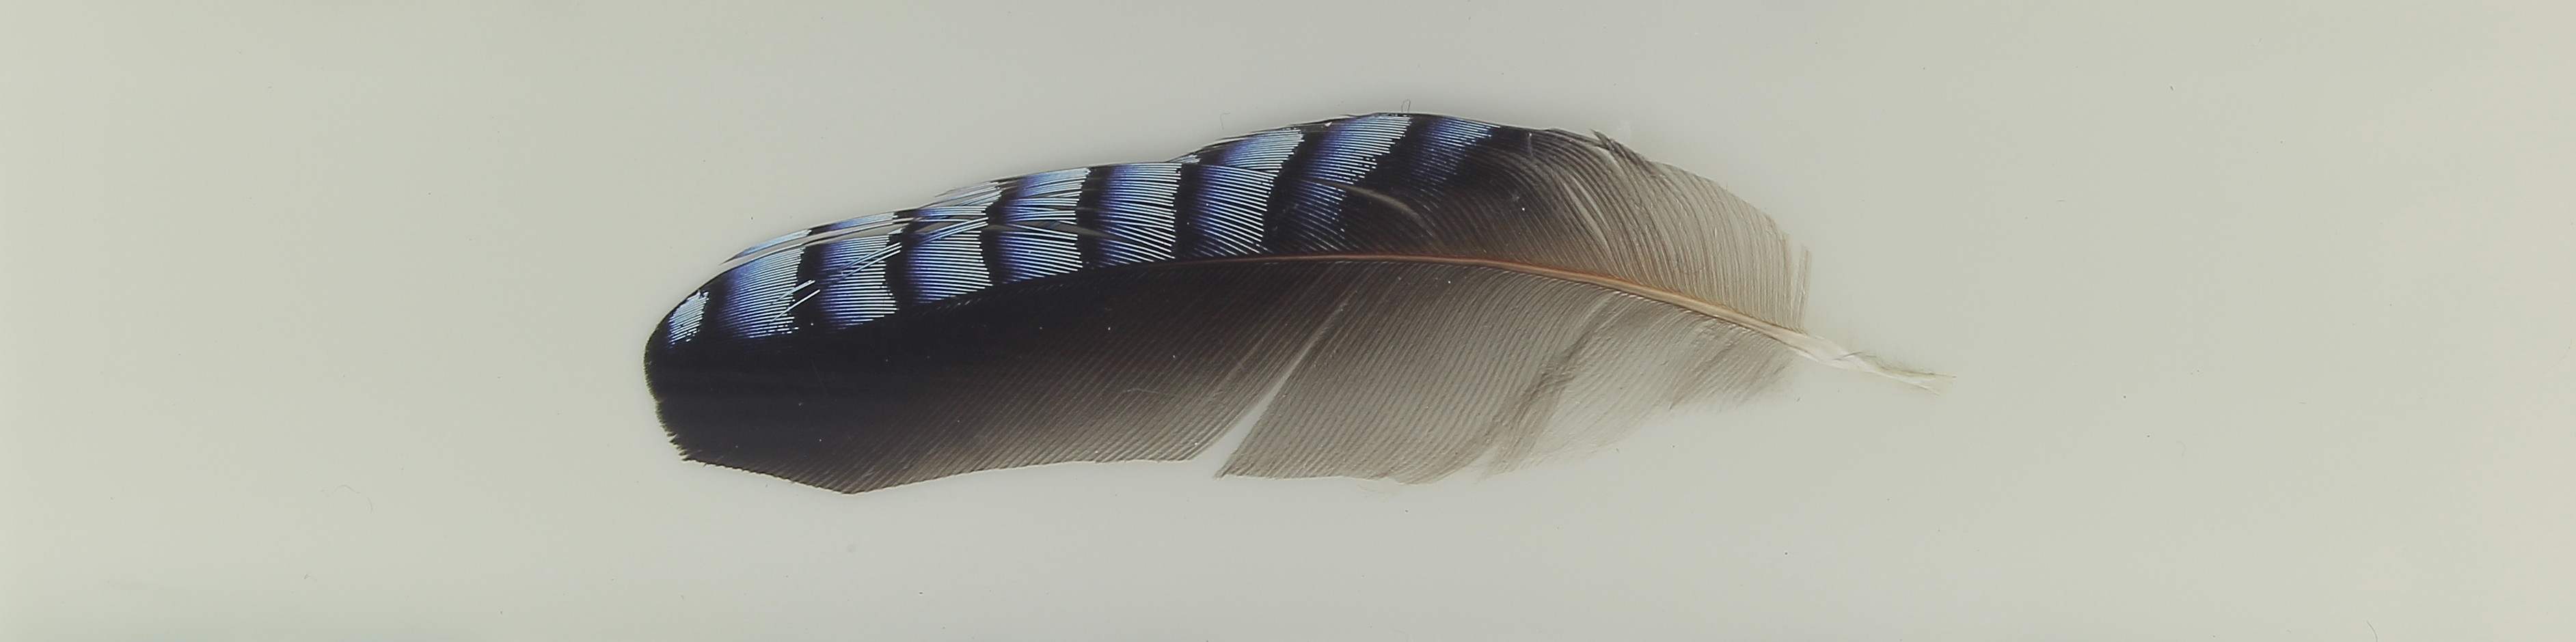 Inclusion, a jay feather white background duplex